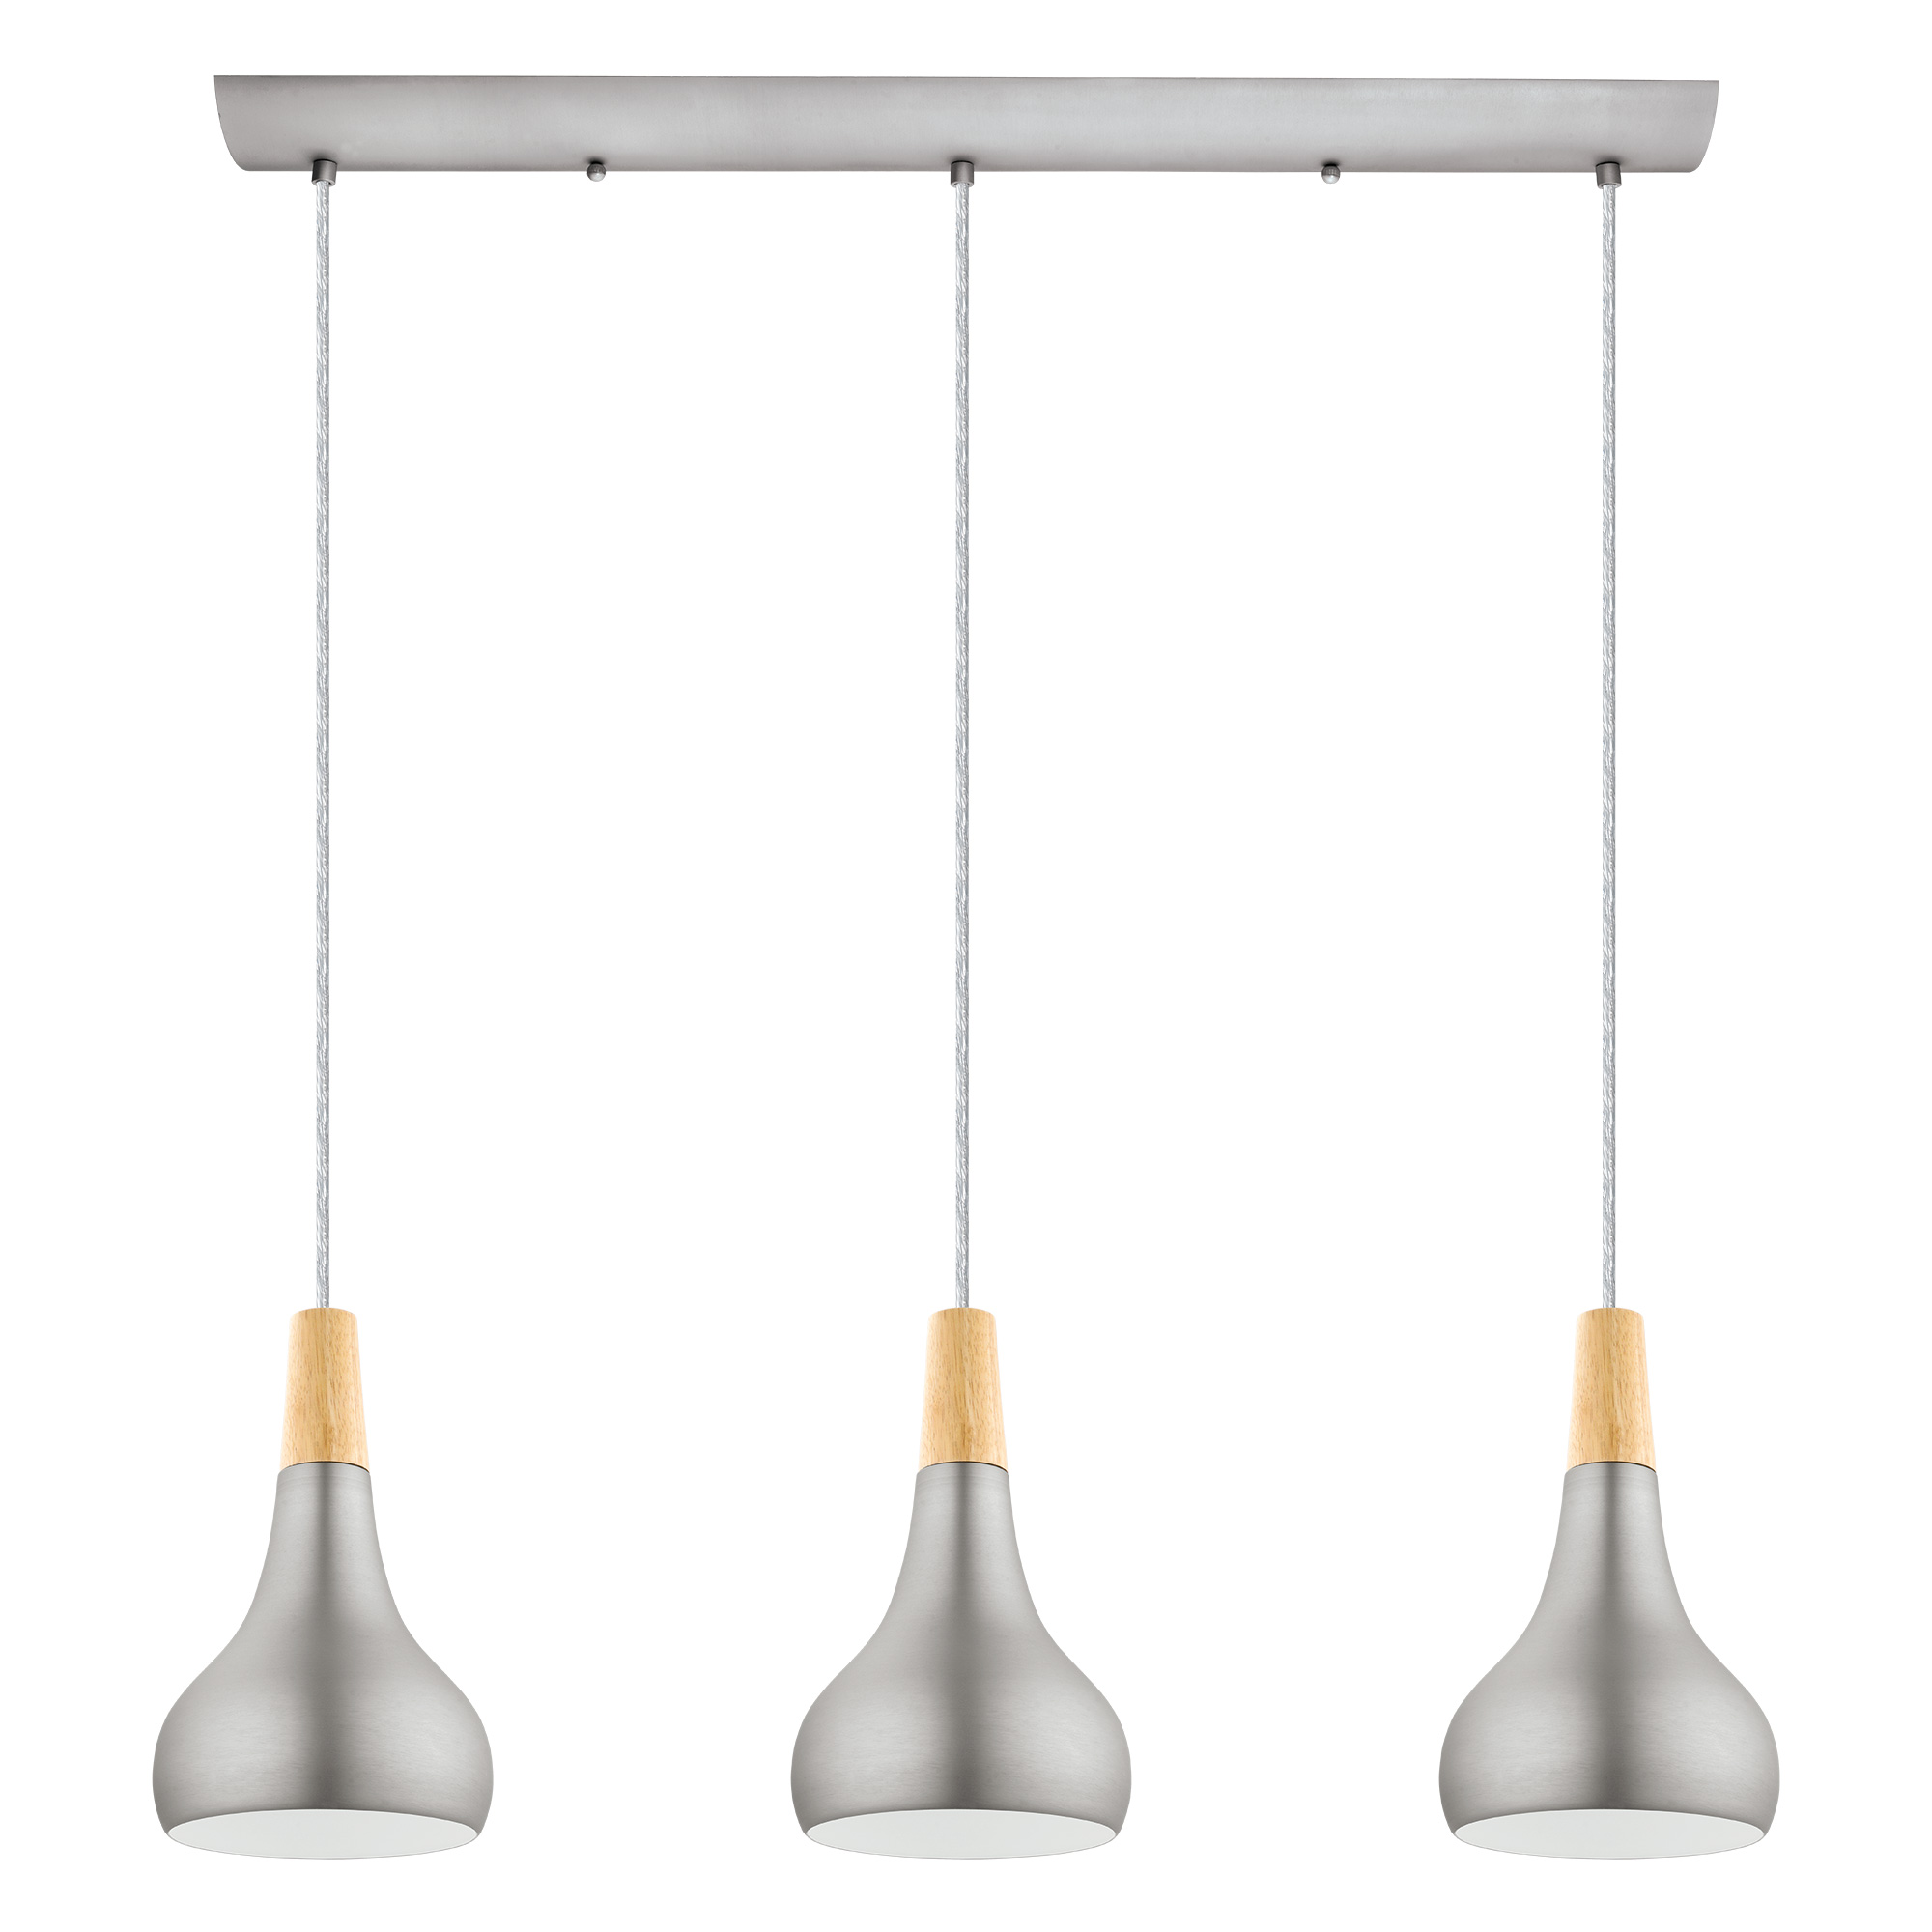 Eglo 202314A 3x60W Linear Pendant w/ Brushed Nickel and Wood Finish 